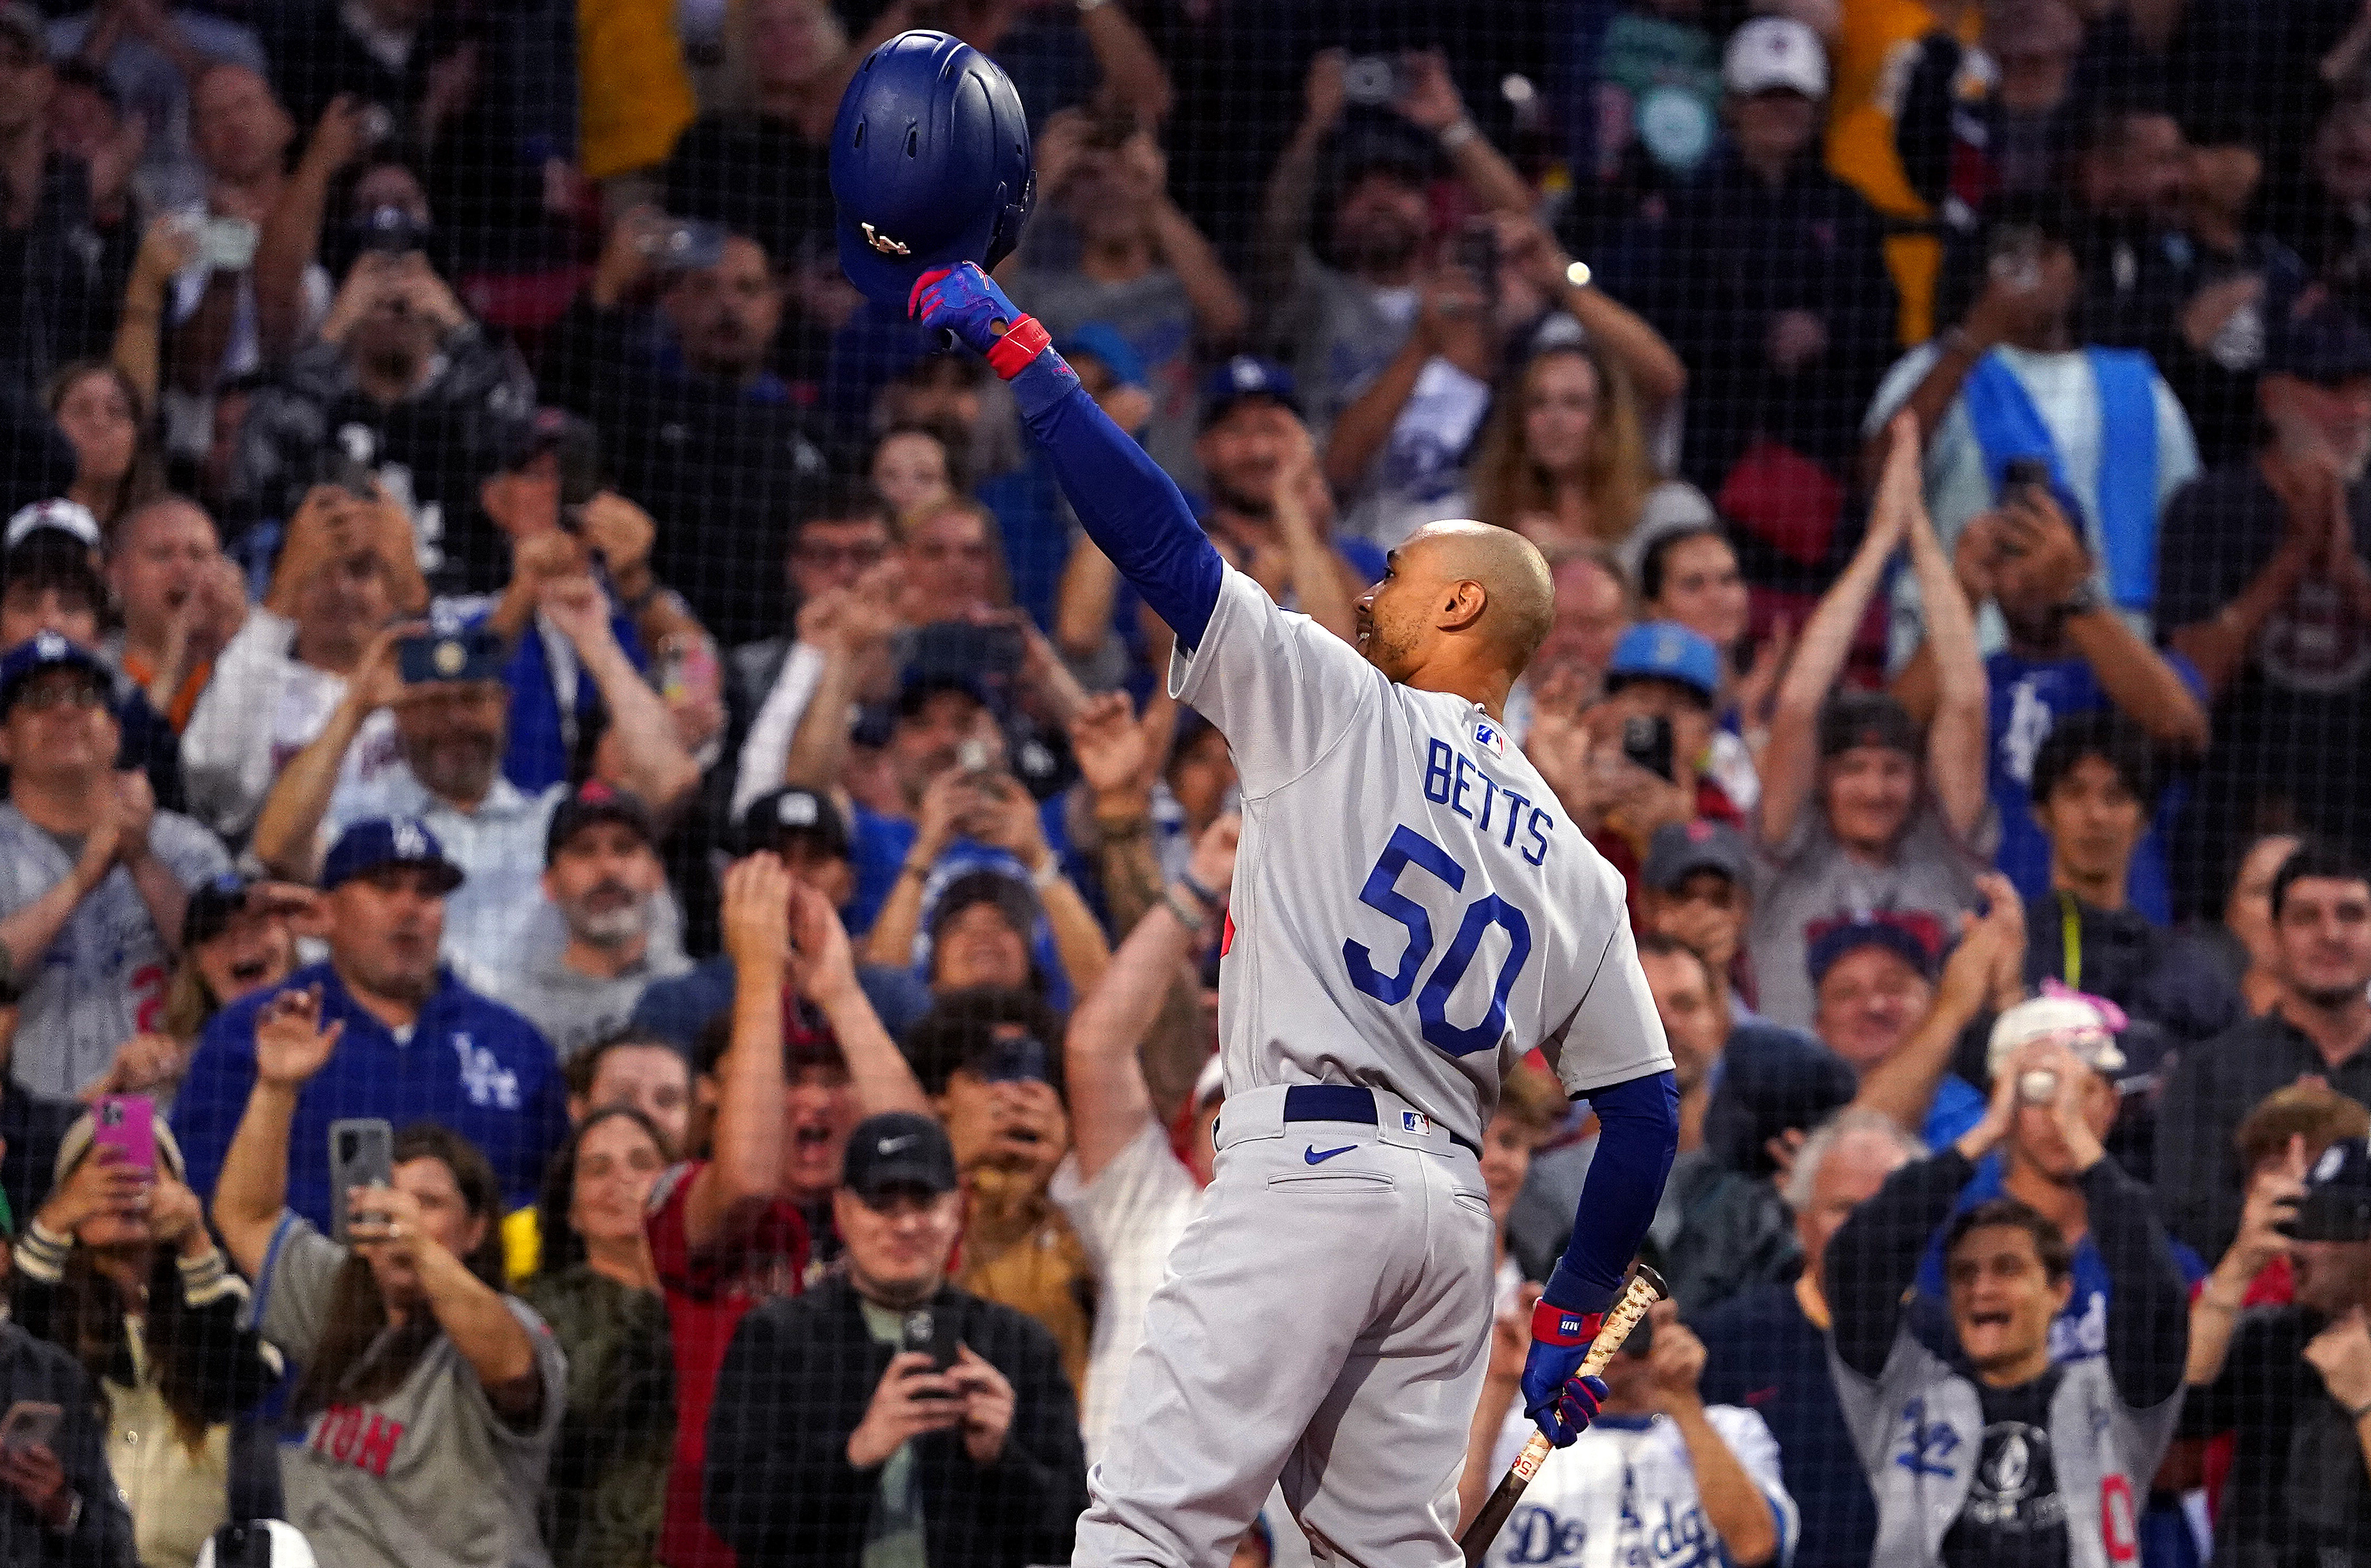 Mookie Betts, wearing Dodger grays, waves his helmet to a cheering crowd at a baseball stadium.